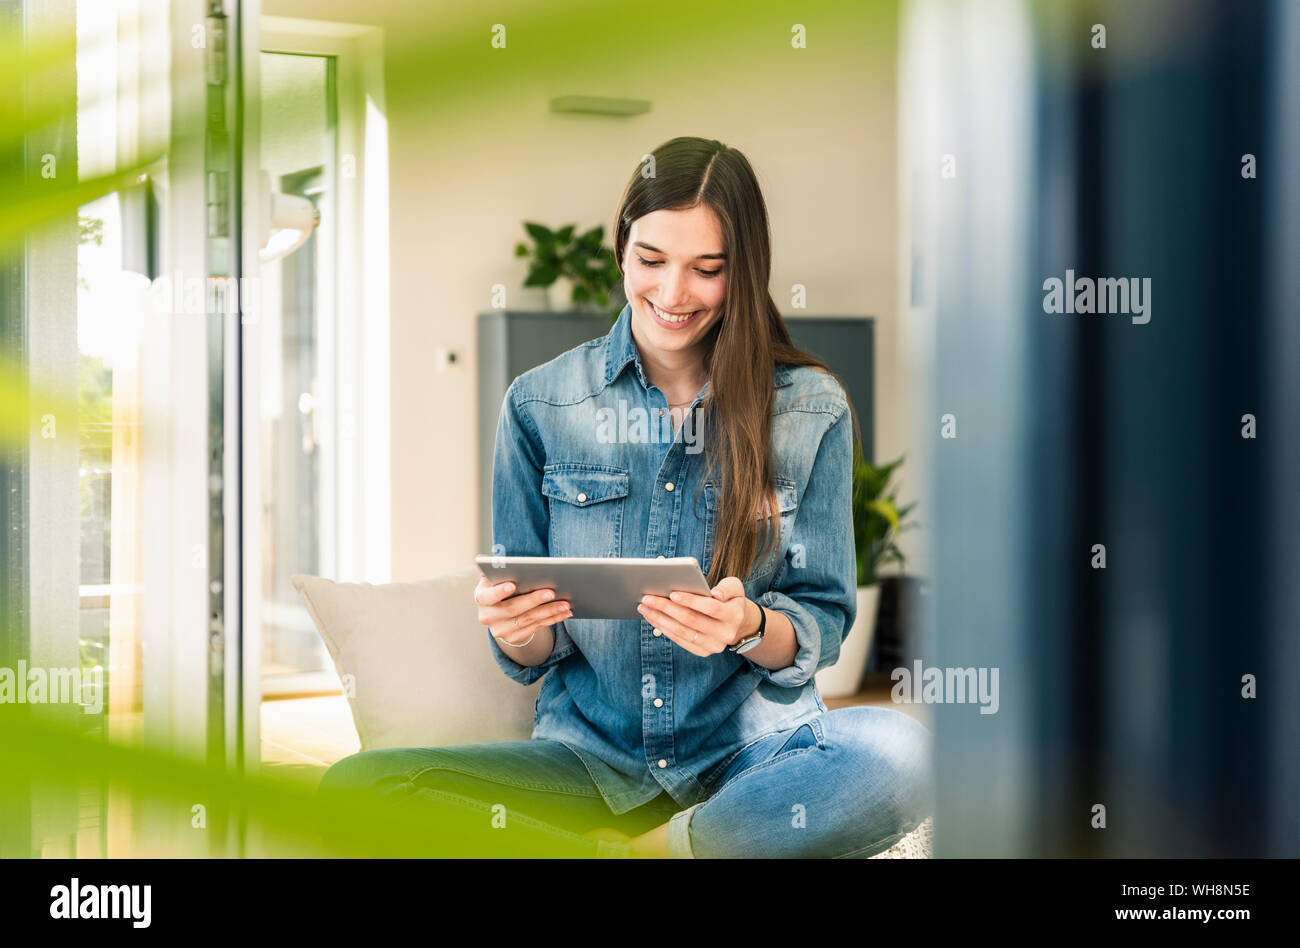 Smiling young woman using tablet Banque D'Images